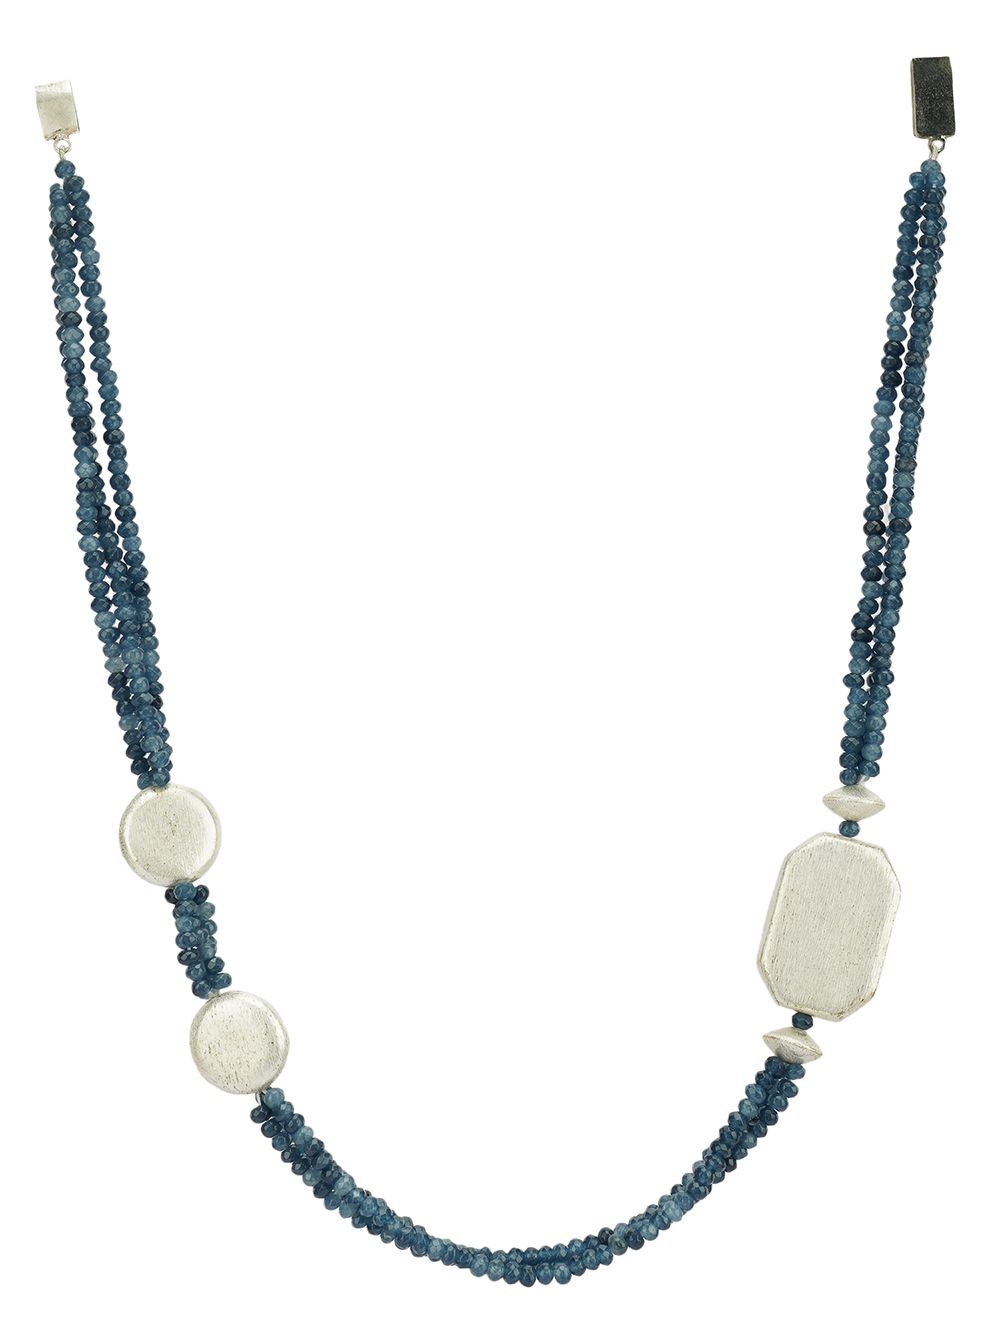 Blue Handcrafted  Matte  Beaded Necklace